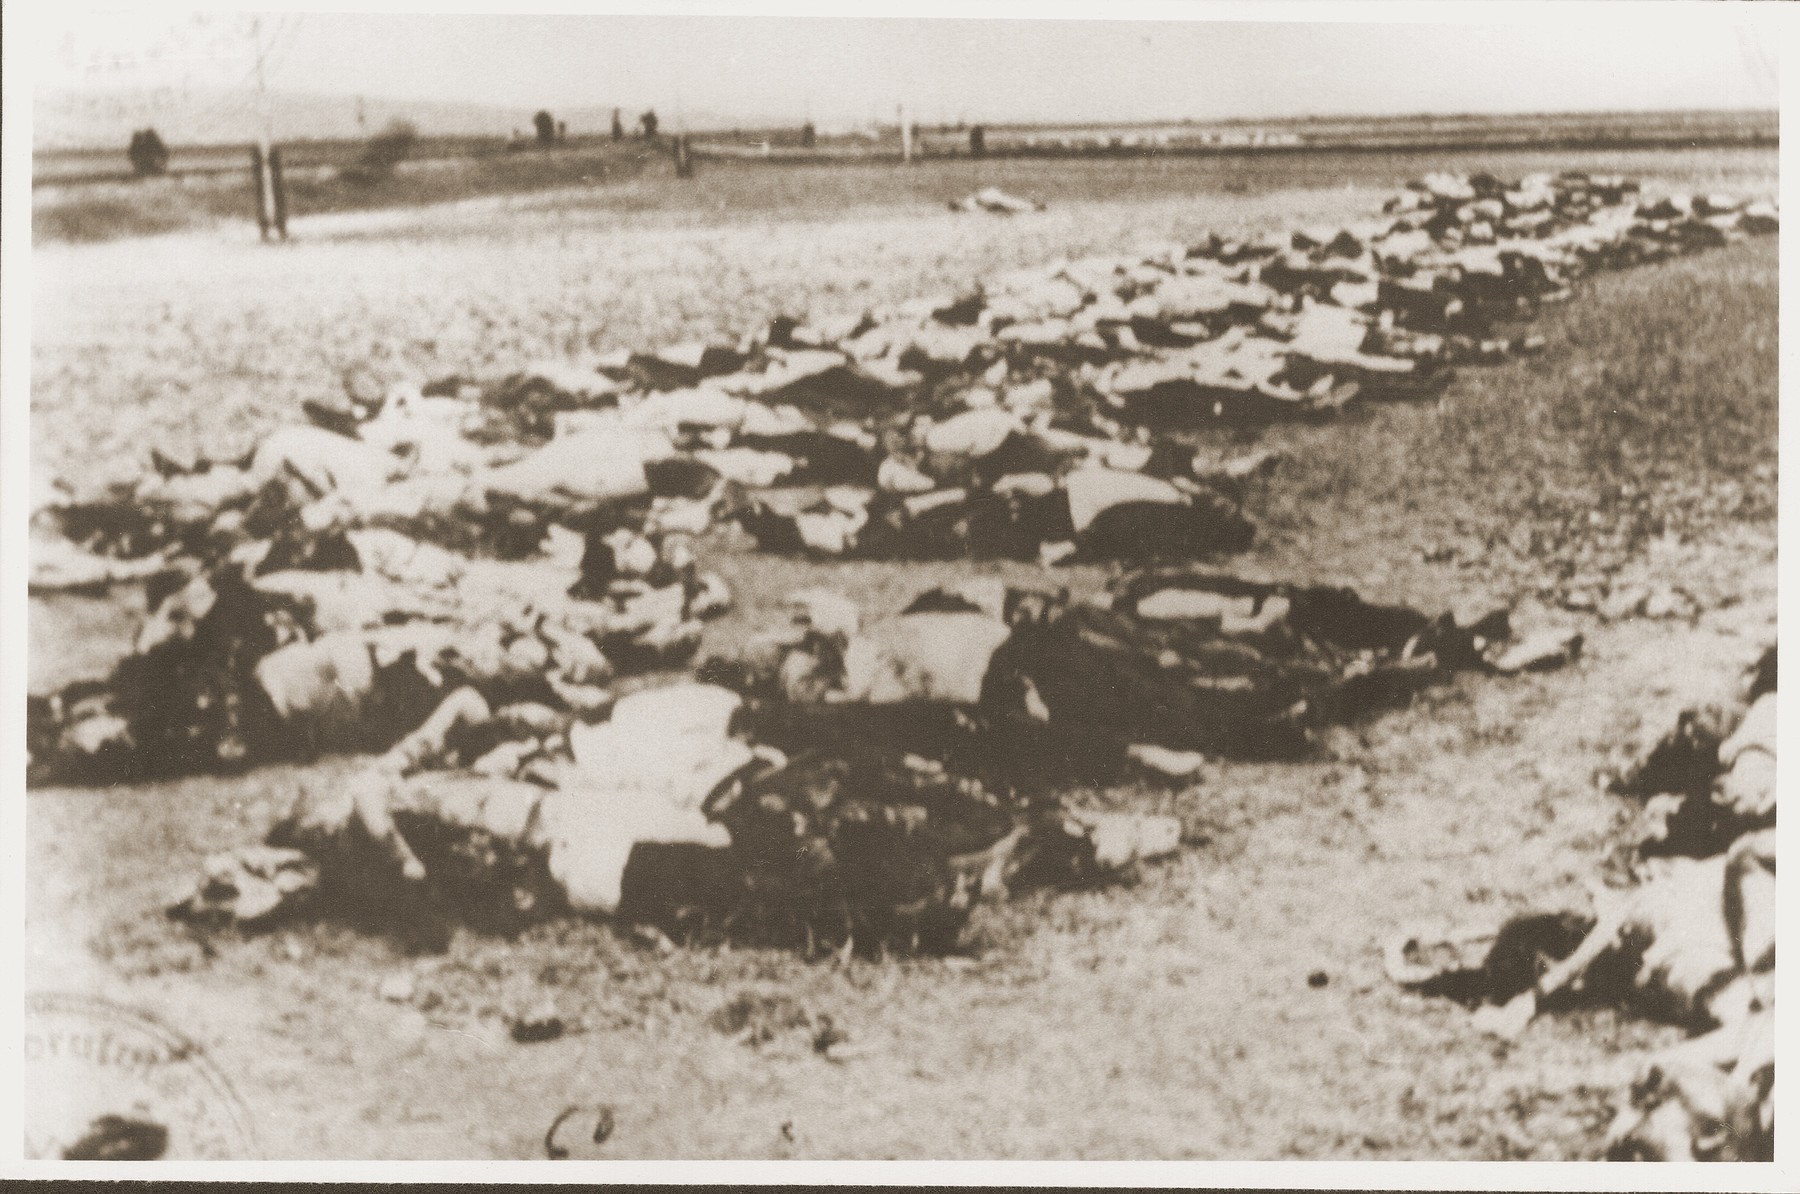 The bodies of Jews removed from the Iasi death train during a stop on the journey, are laid out in rows beside the tracks.